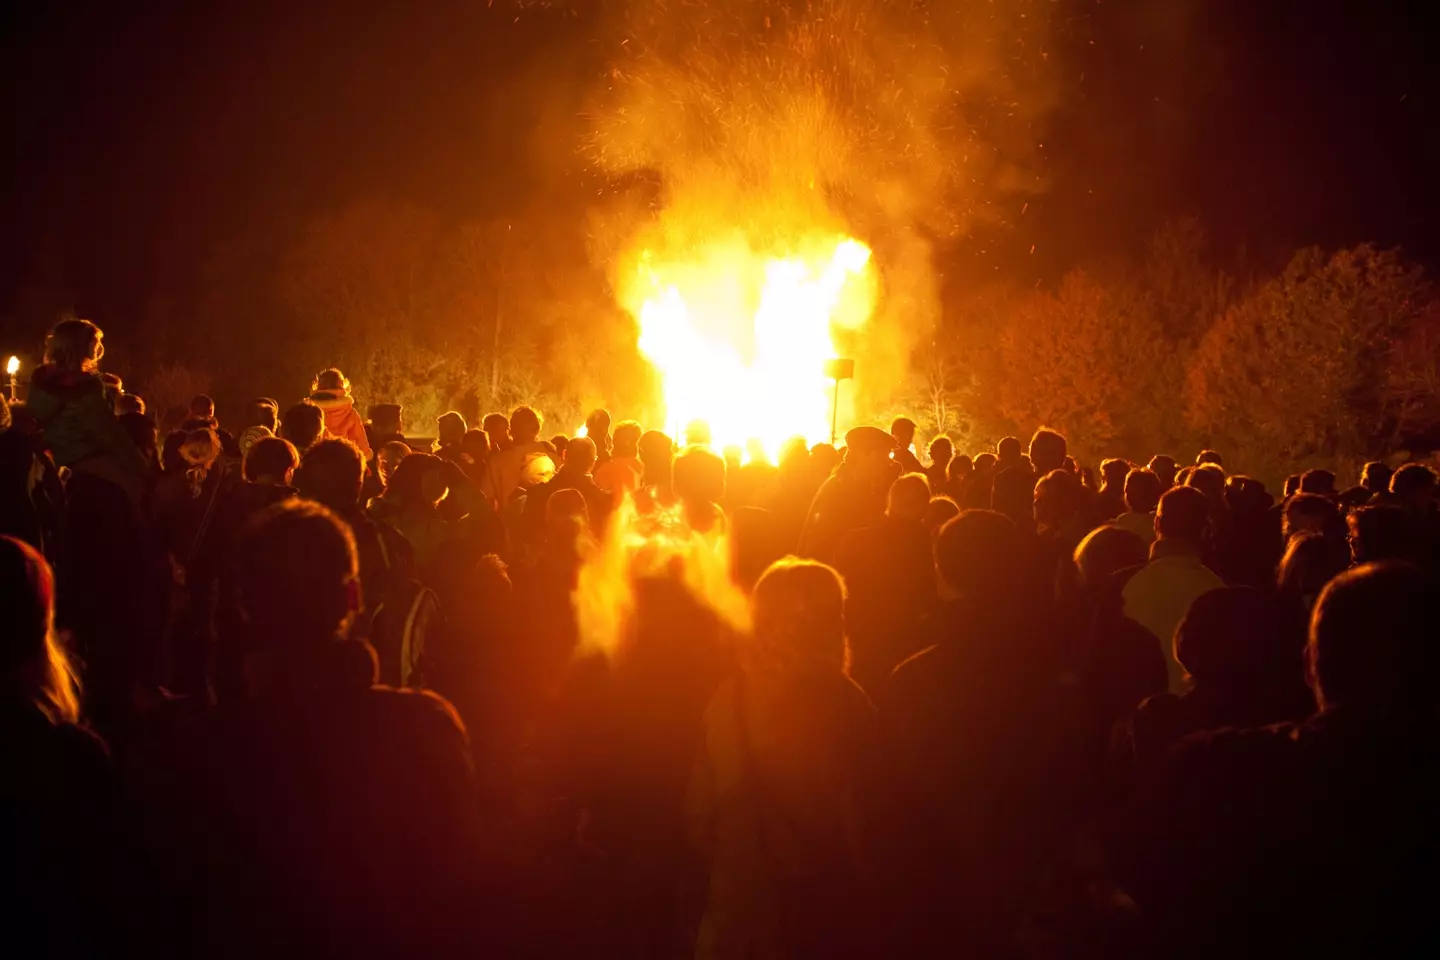 Many cities across the UK have scrapped plans to hold Bonfire Night celebrations.